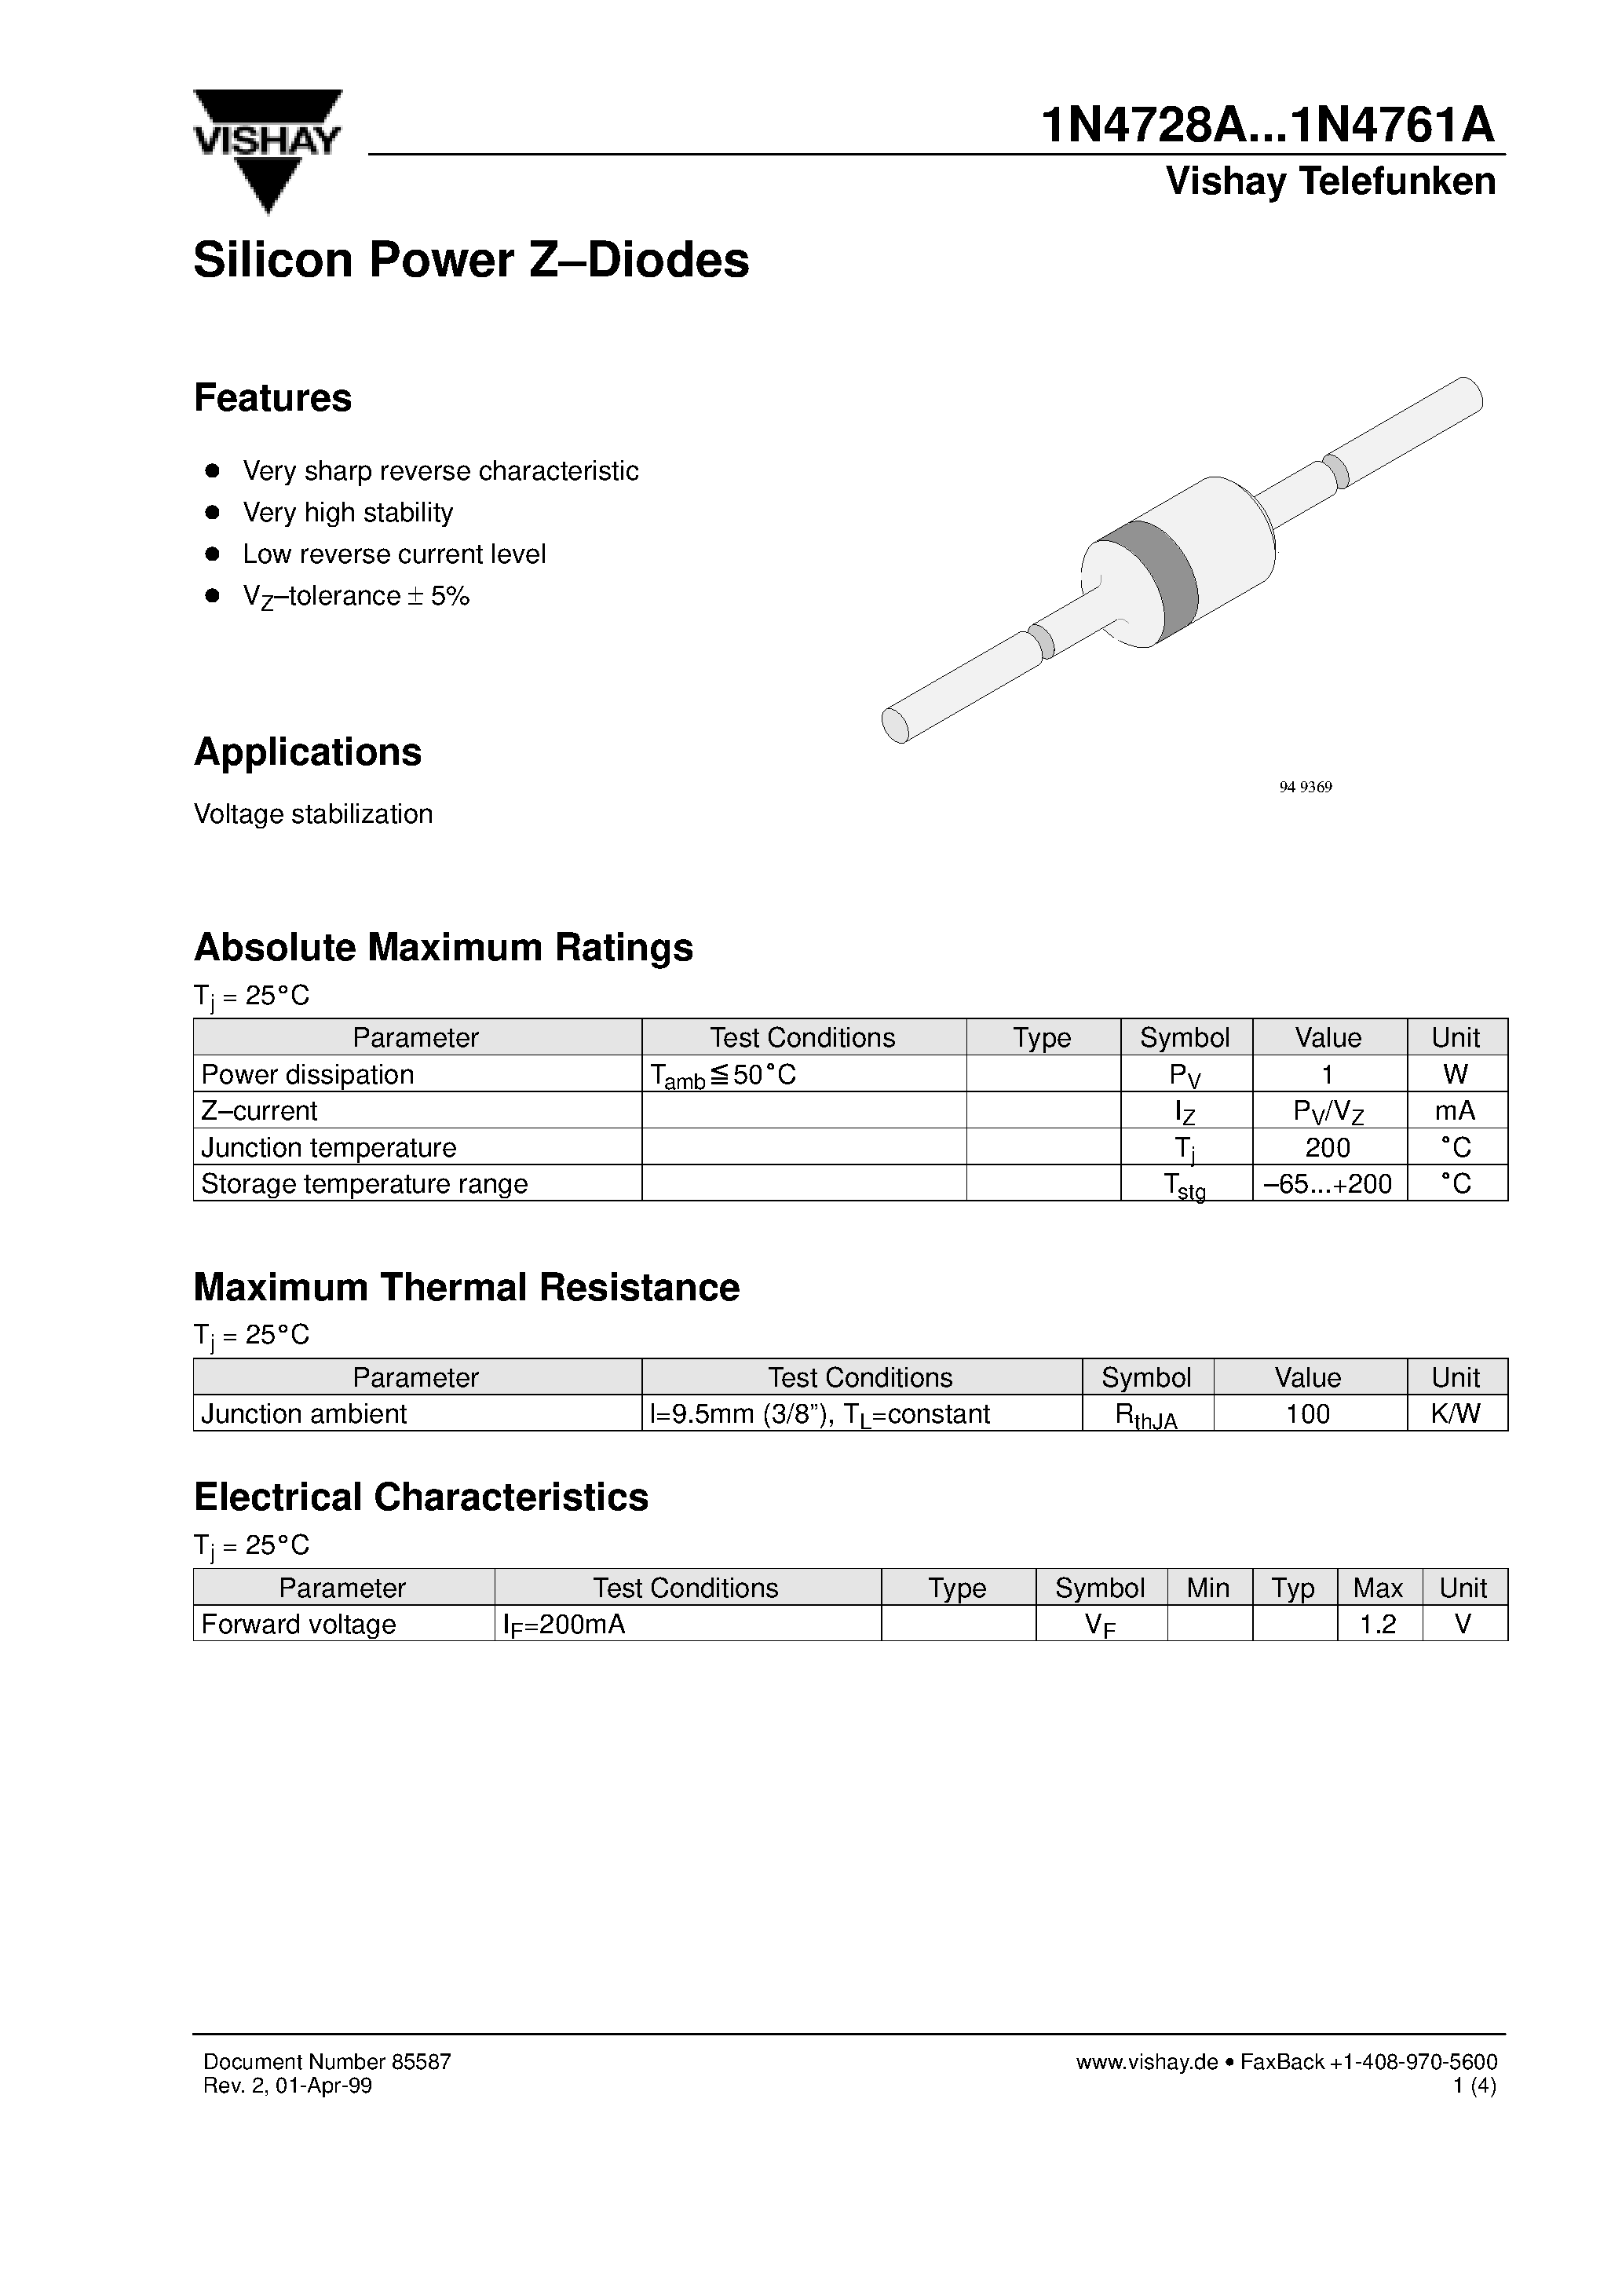 Datasheet 1N4753A - Silicon Power Z-Diodes page 1